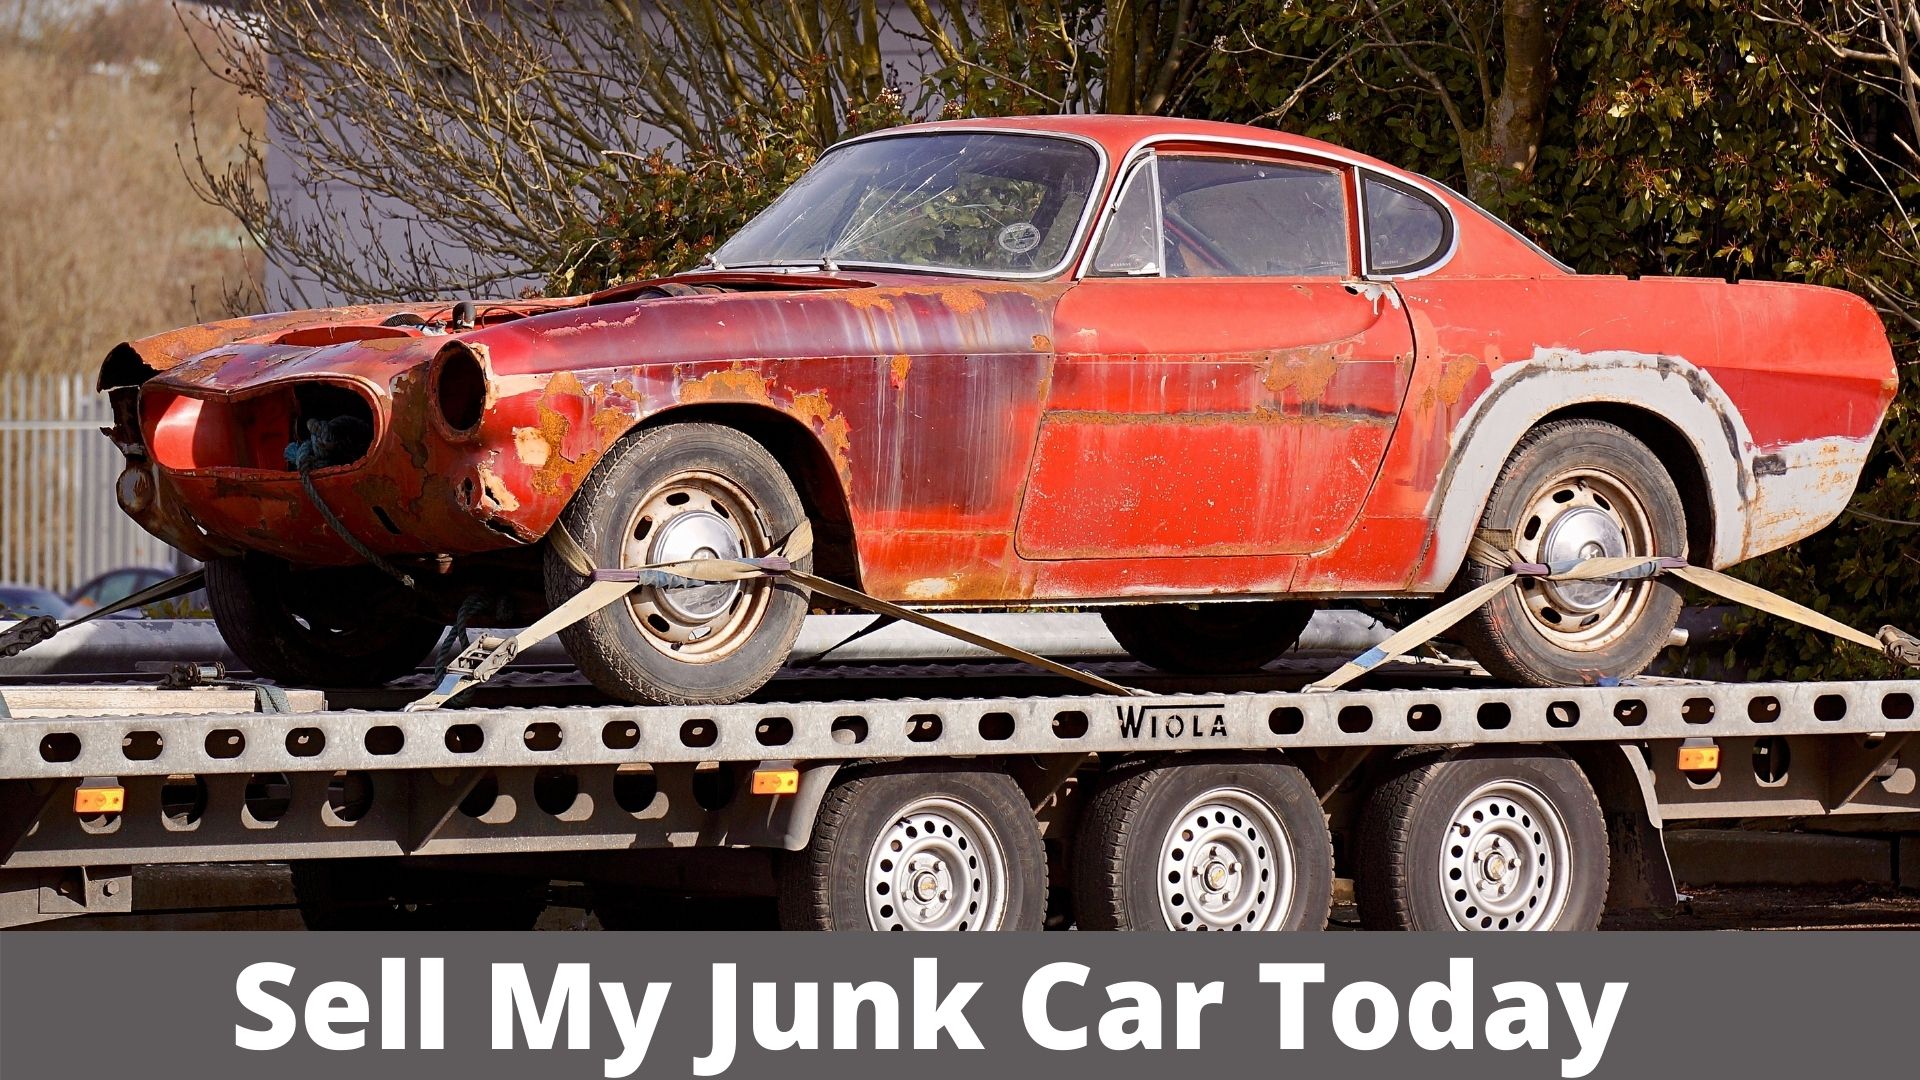 Sell My Junk Car Today